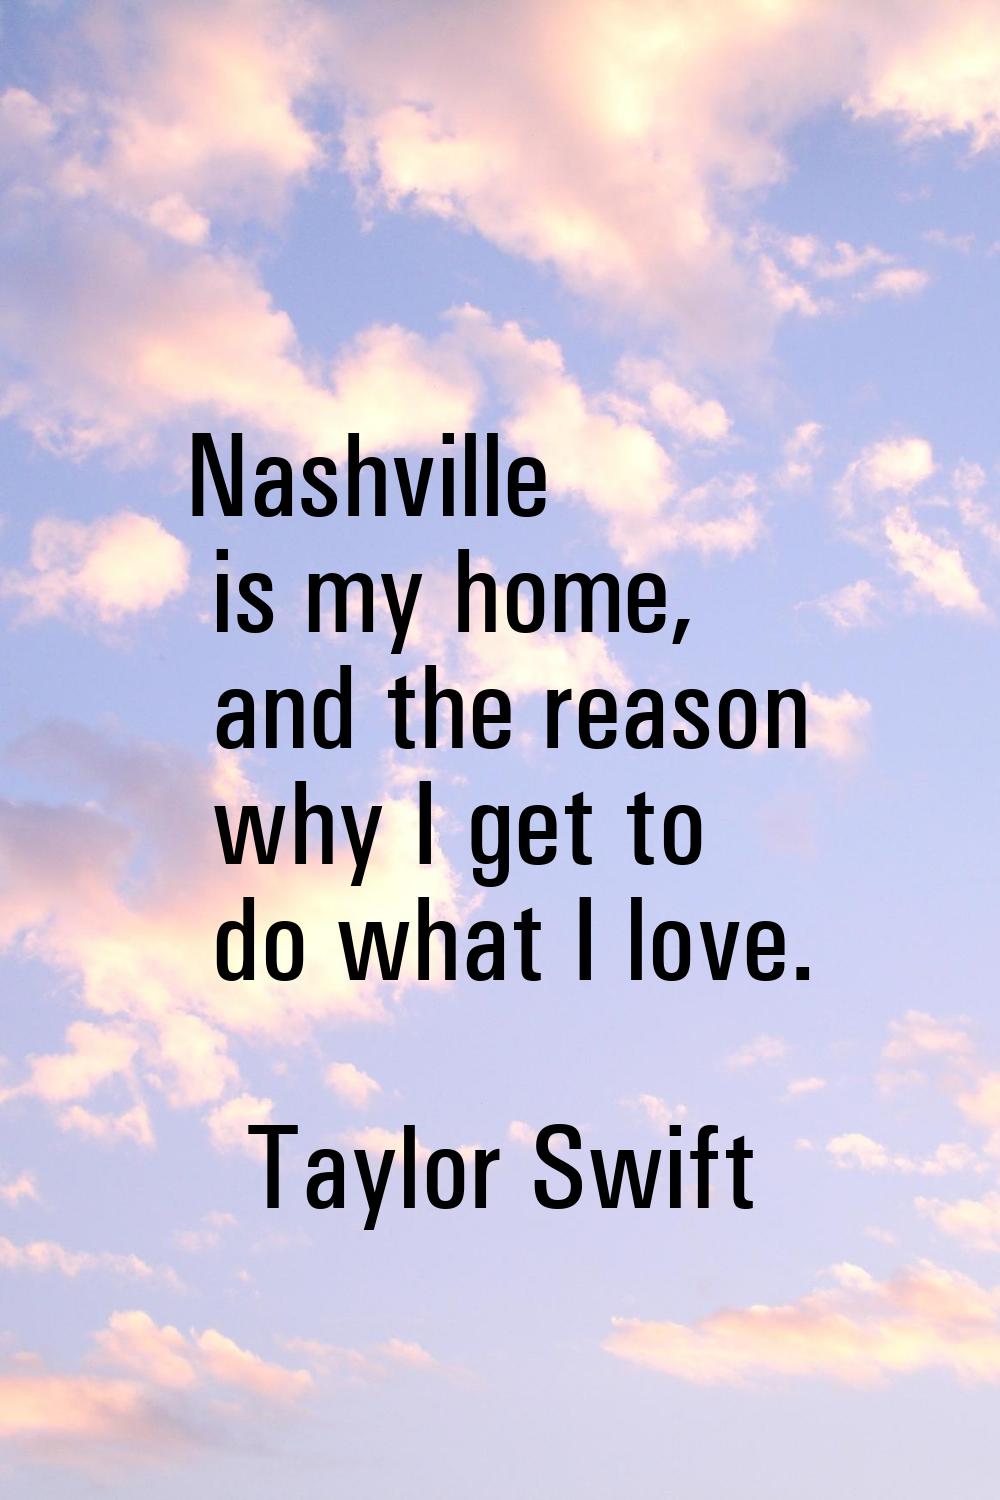 Nashville is my home, and the reason why I get to do what I love.